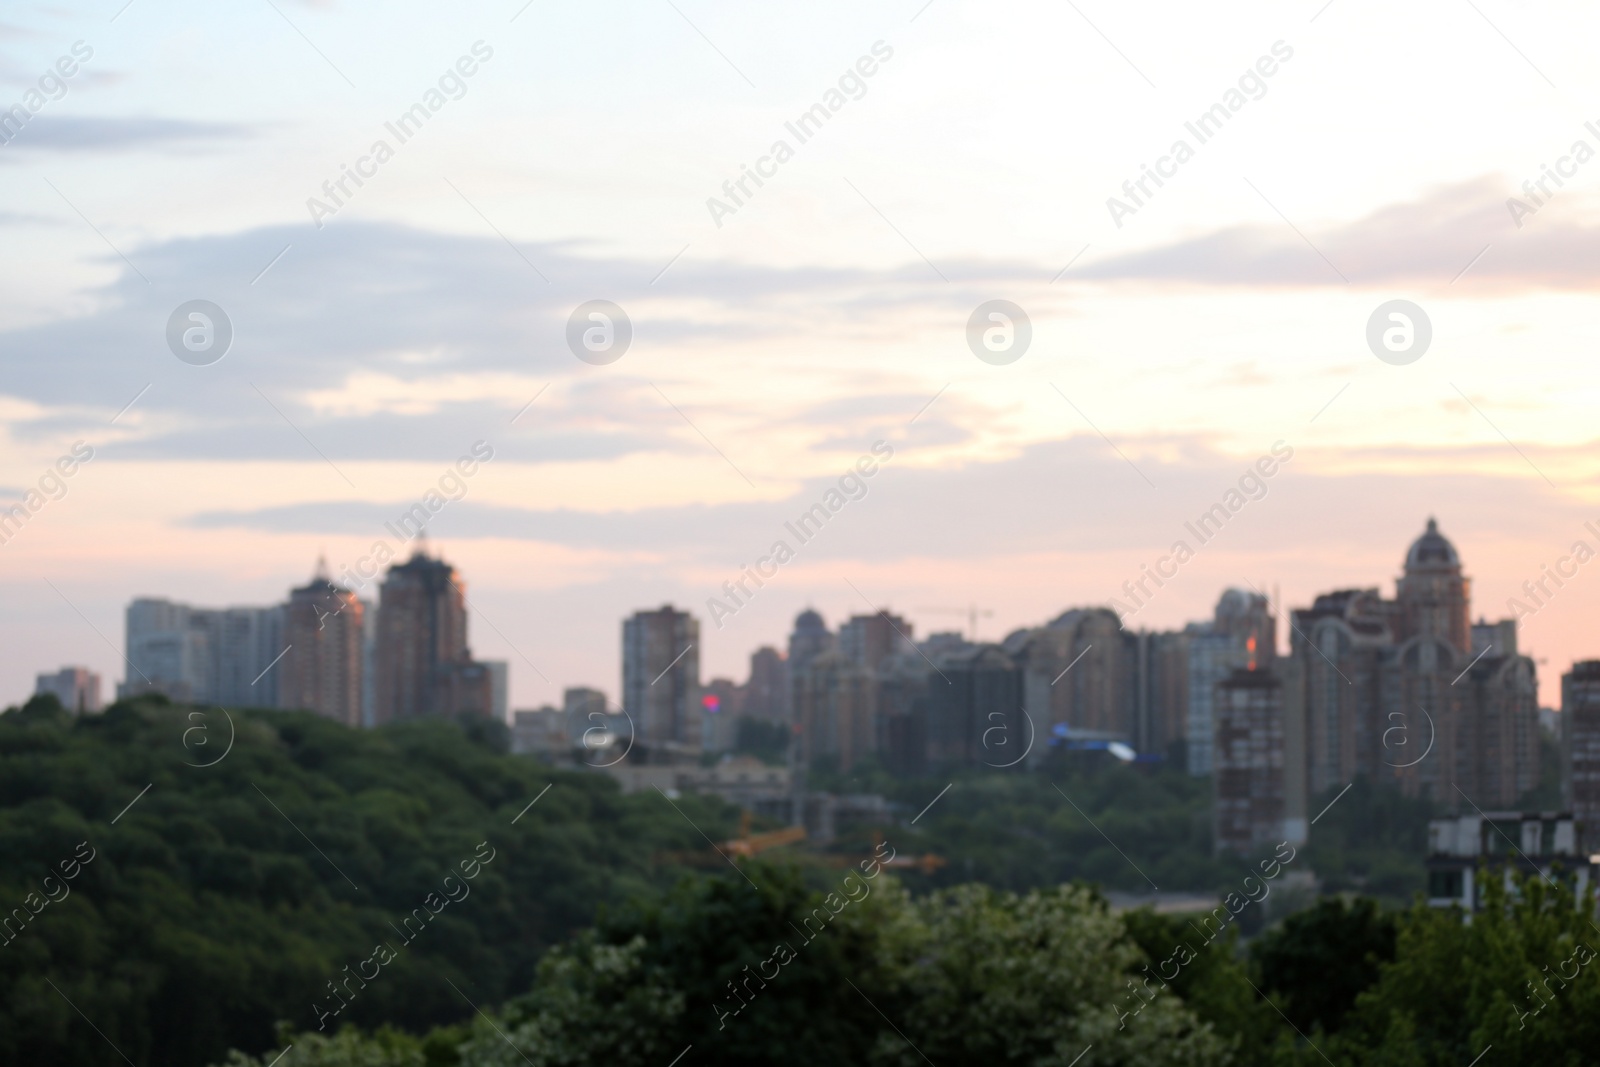 Photo of KYIV, UKRAINE - MAY 23, 2019: City district with modern buildings at sunset, blurred view